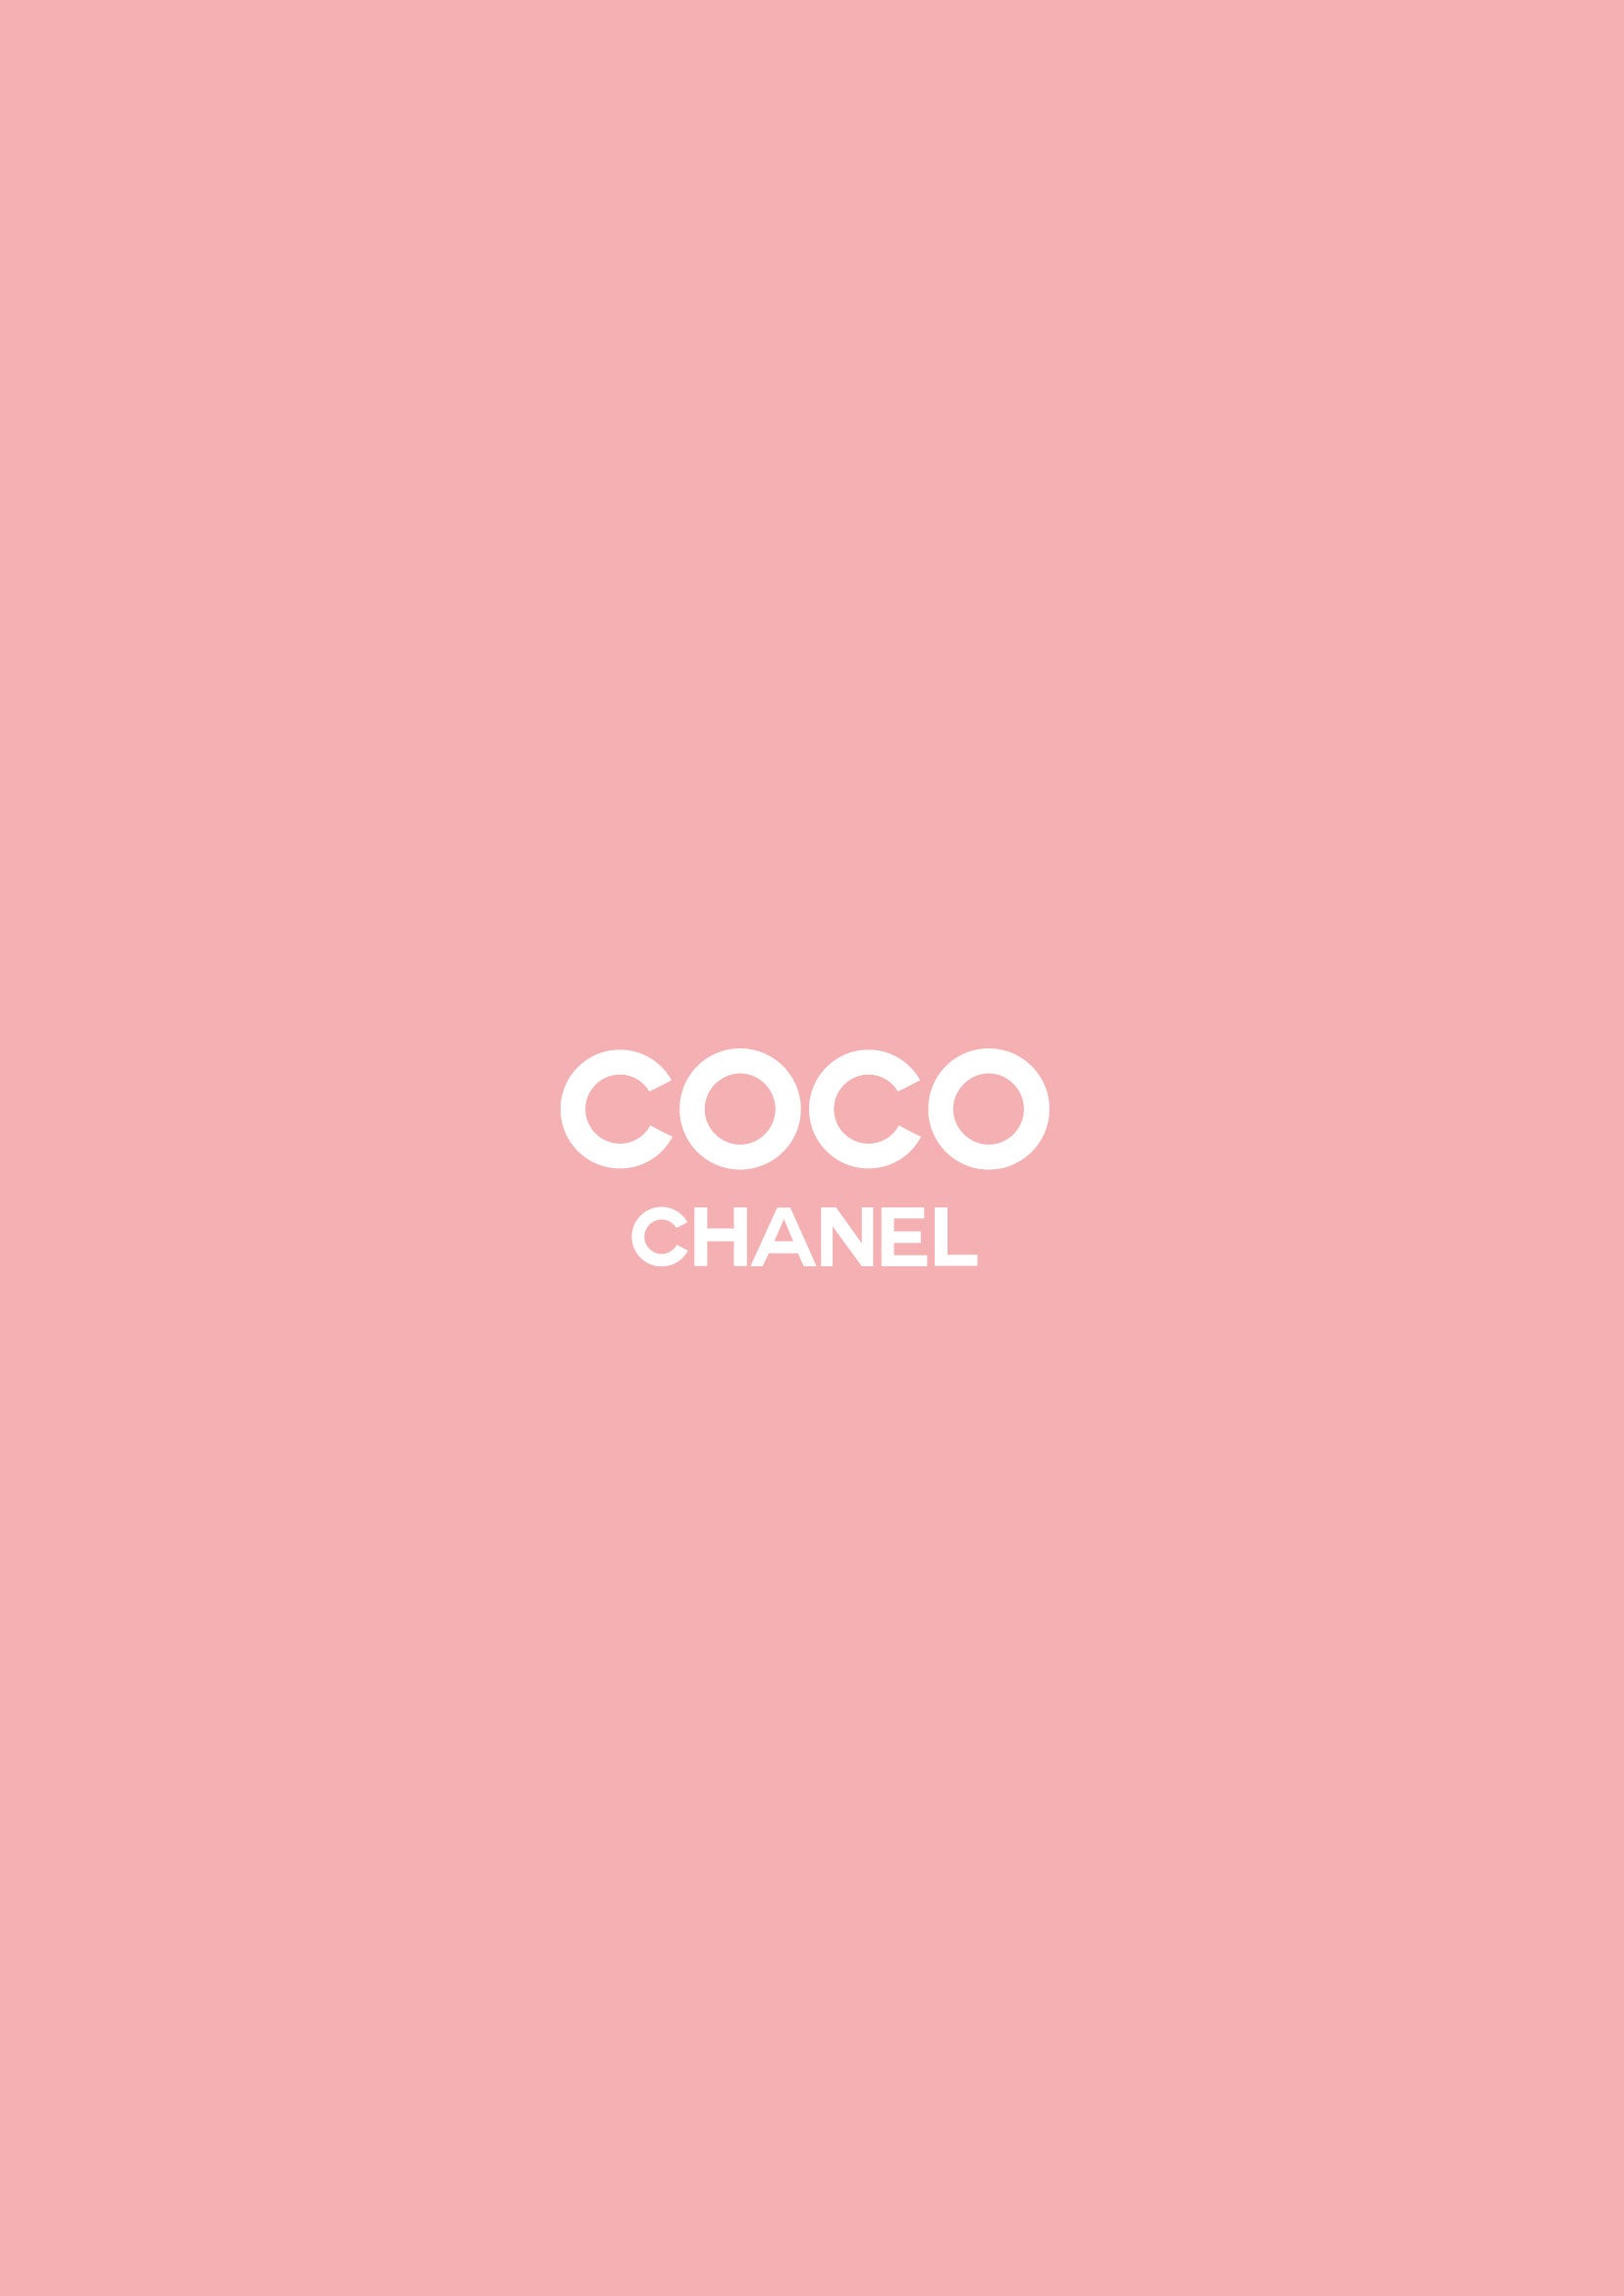 Buy Coco Chanel Quote Print Online